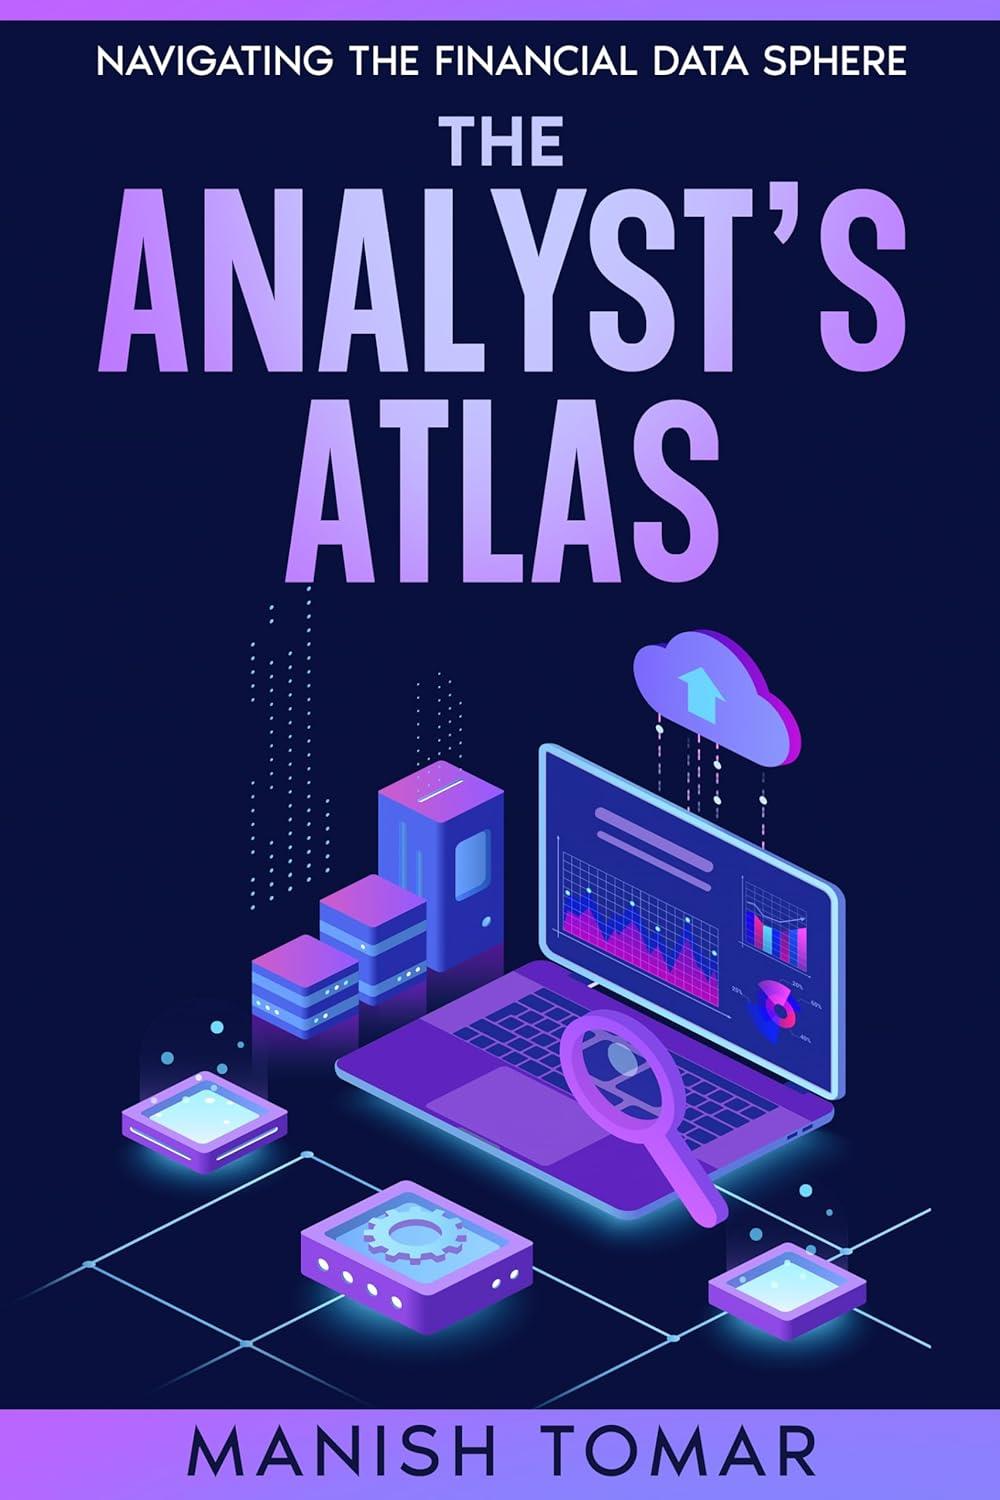 The Analyst’s Atlas: Navigating the Financial Data Sphere